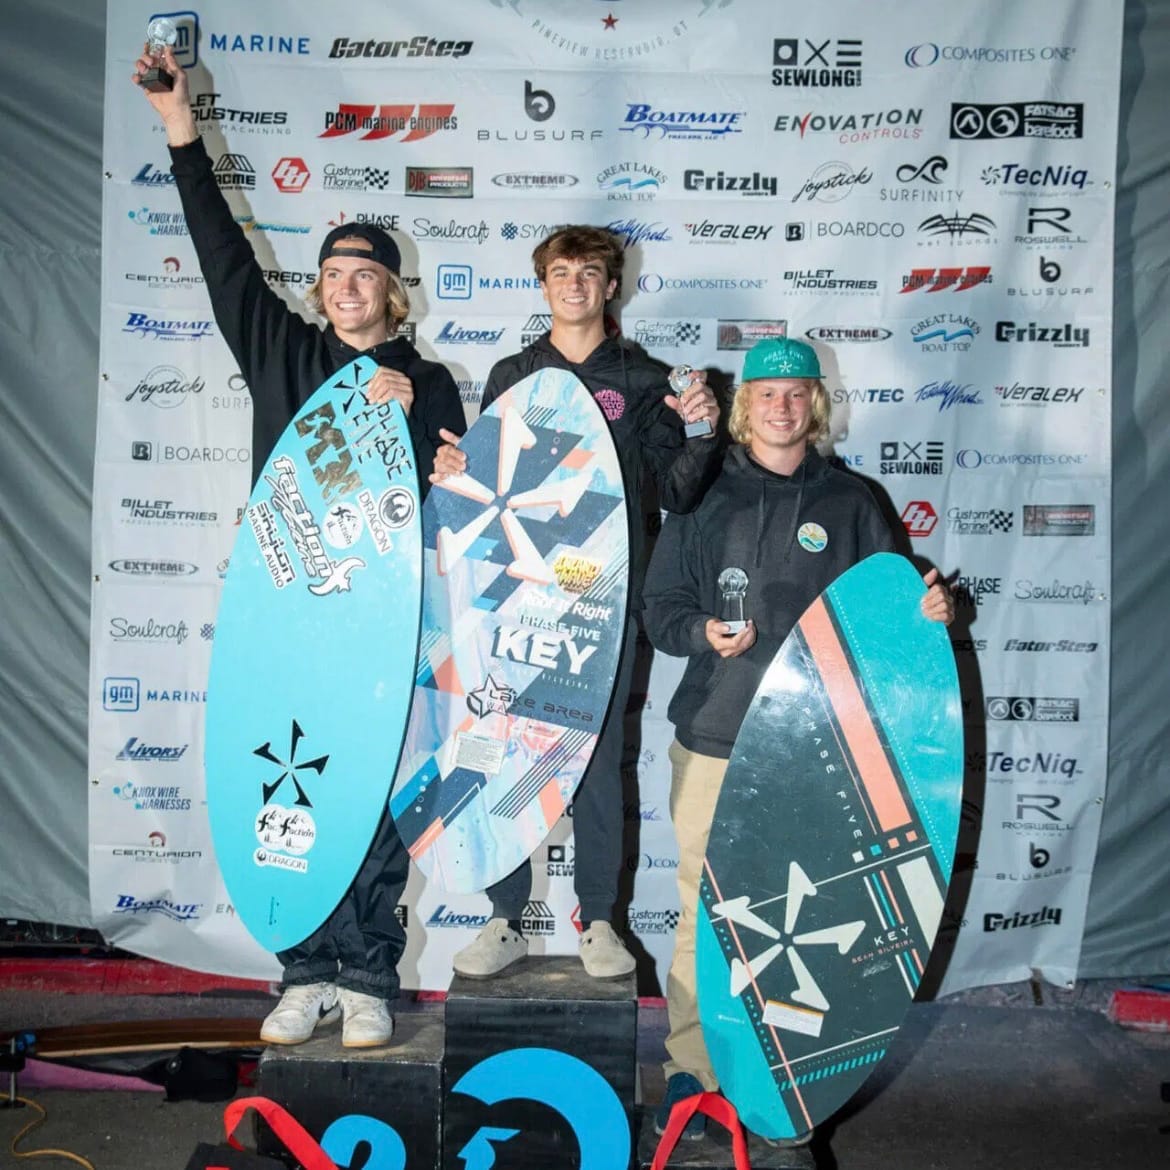 Cade Lybeck and two other surfers standing on top of a podium with their boards.